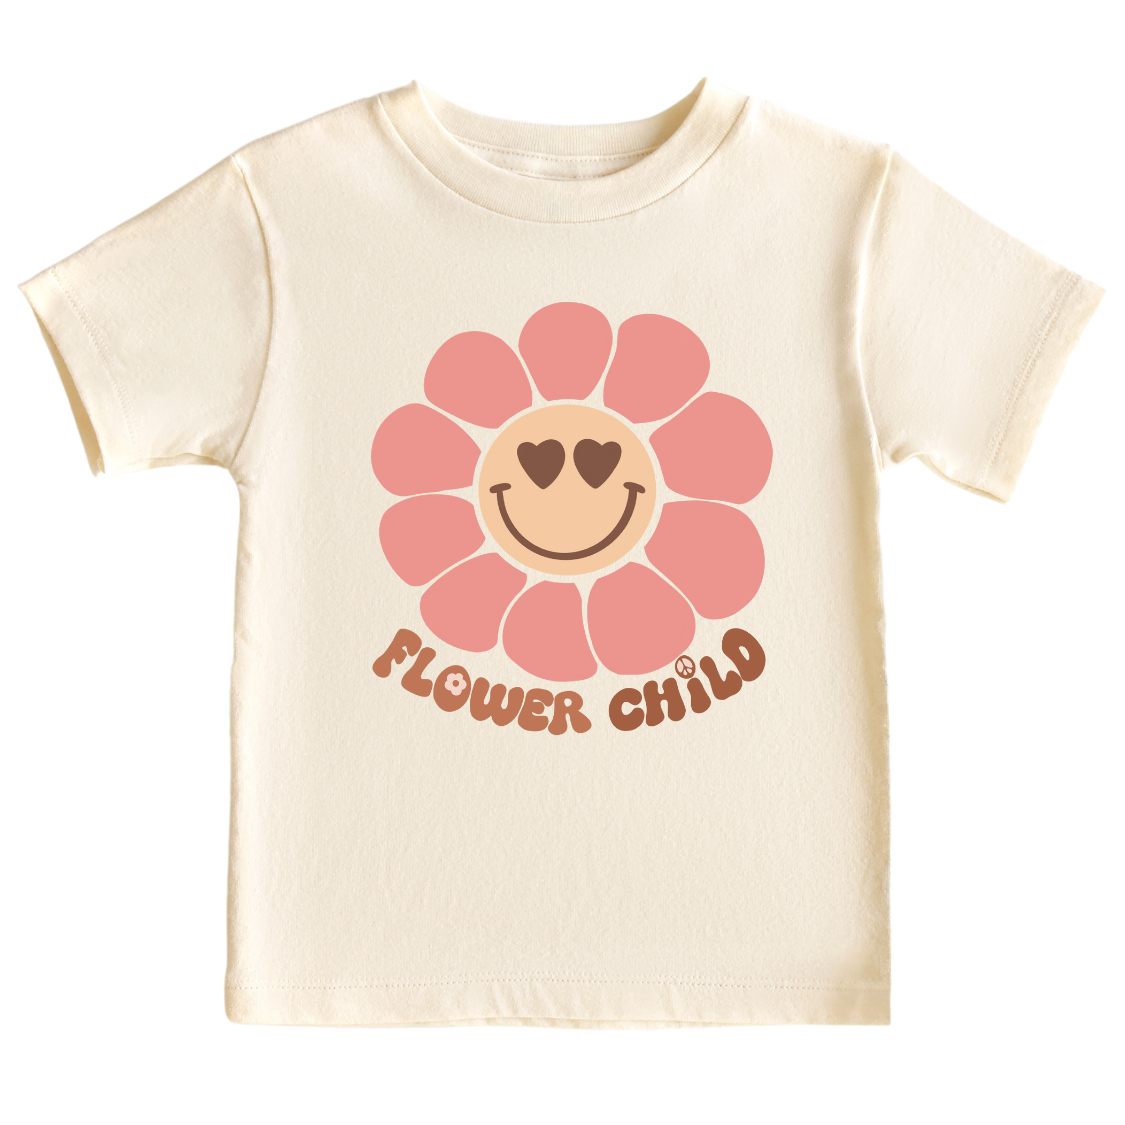 Natural Kids t-shirt with a cute flower graphic and text 'Flower Child' - Express your child's free-spirited style with this adorable flower-themed tee, perfect for little fashionistas. 